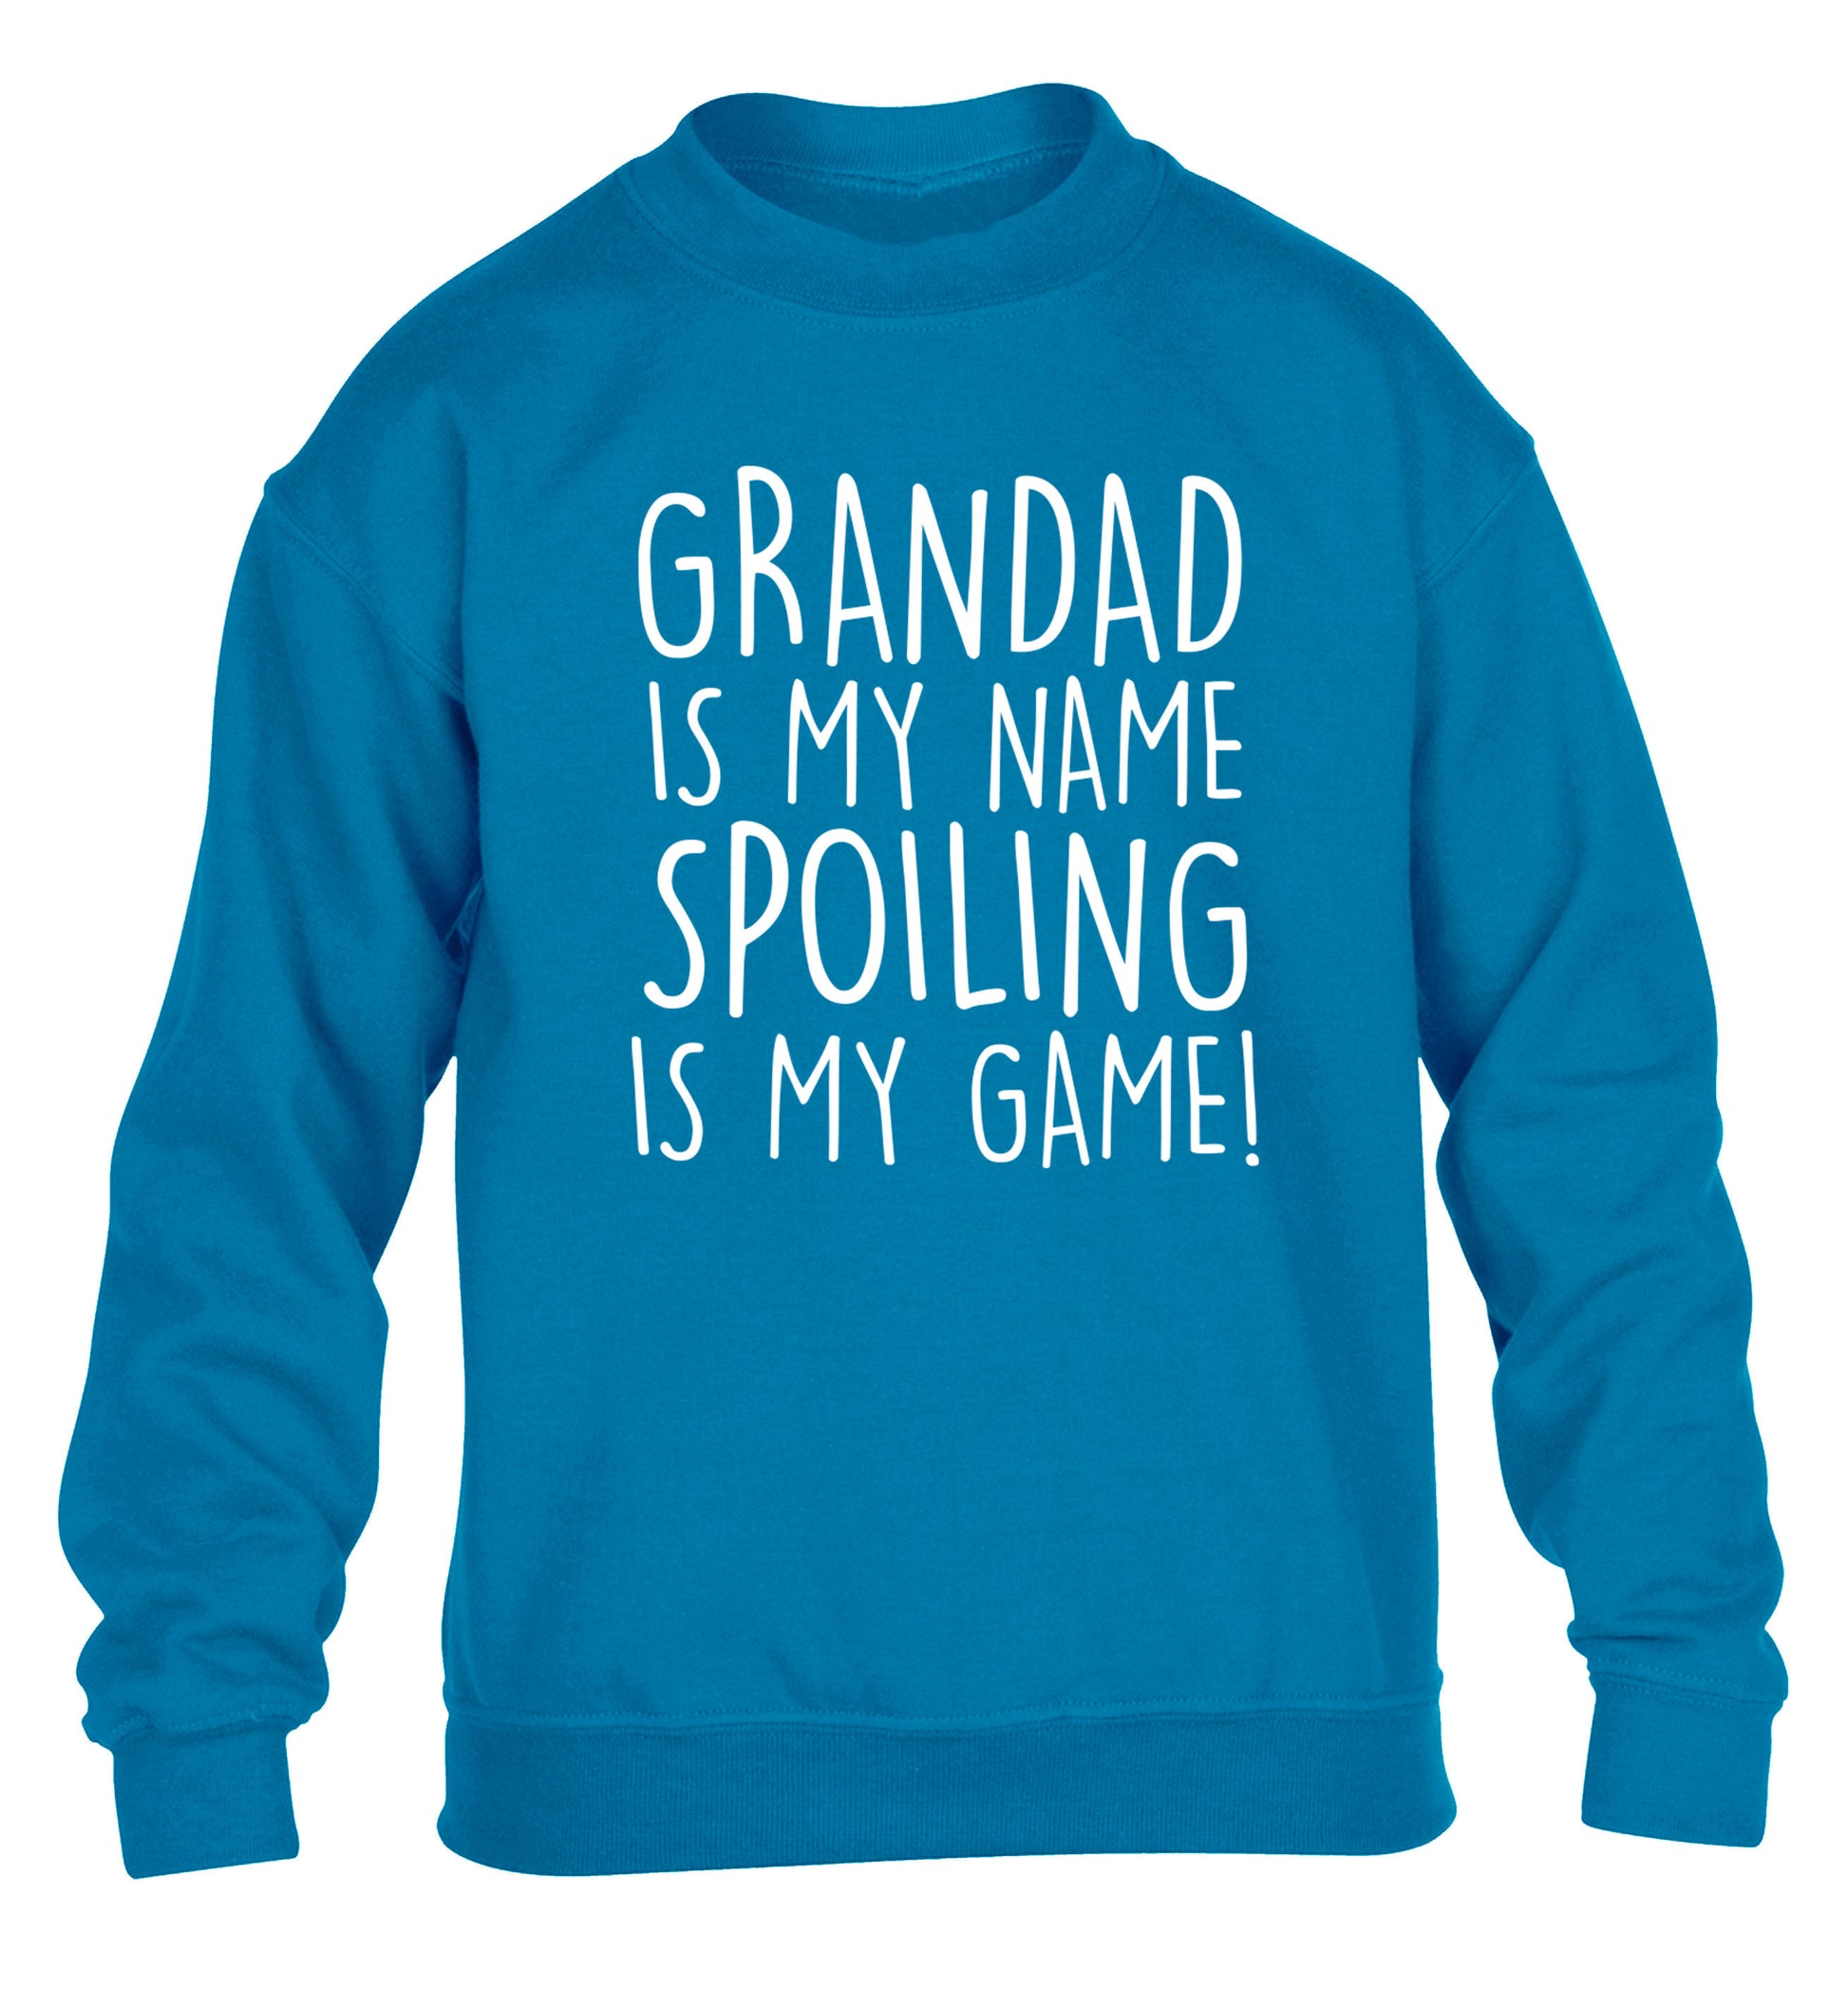 Grandad is my name, spoiling is my game children's blue sweater 12-14 Years